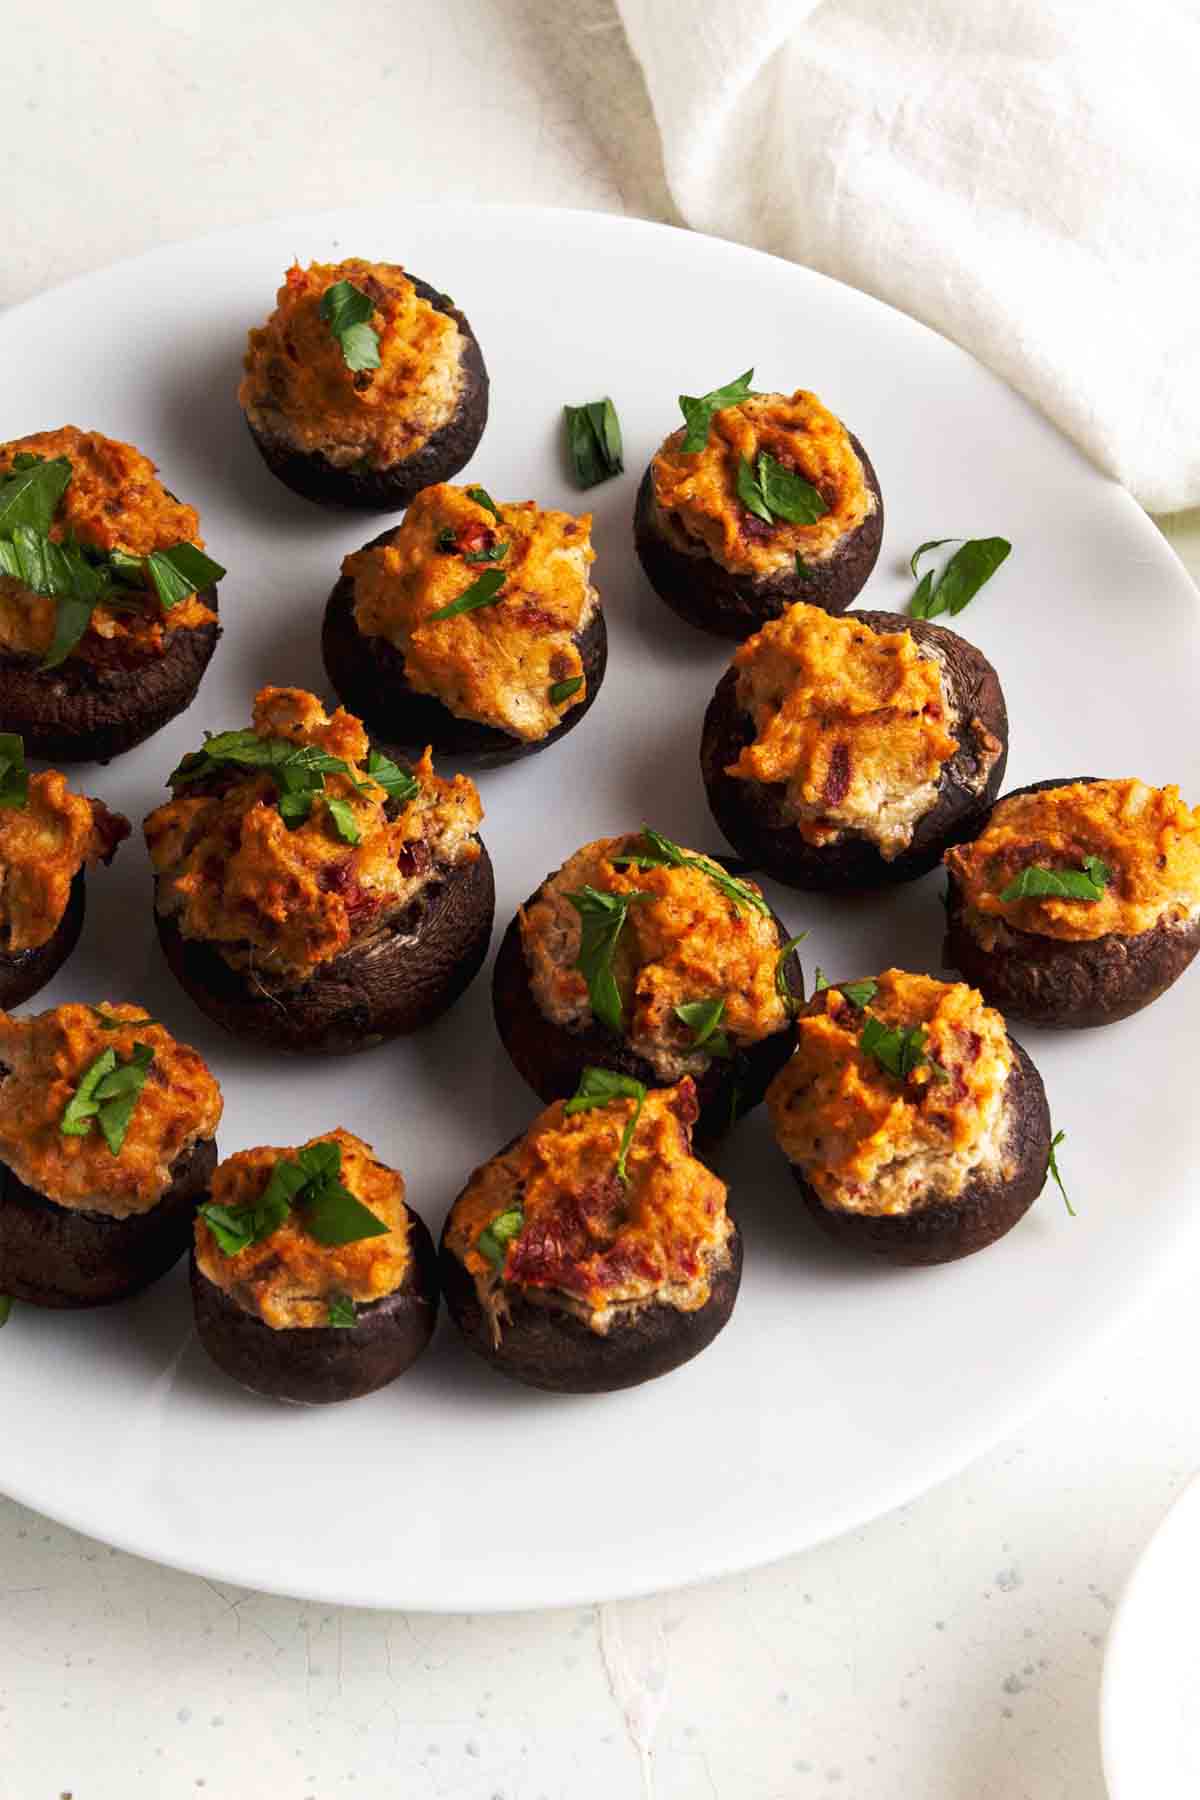 stuffed mushrooms without bread crumbs